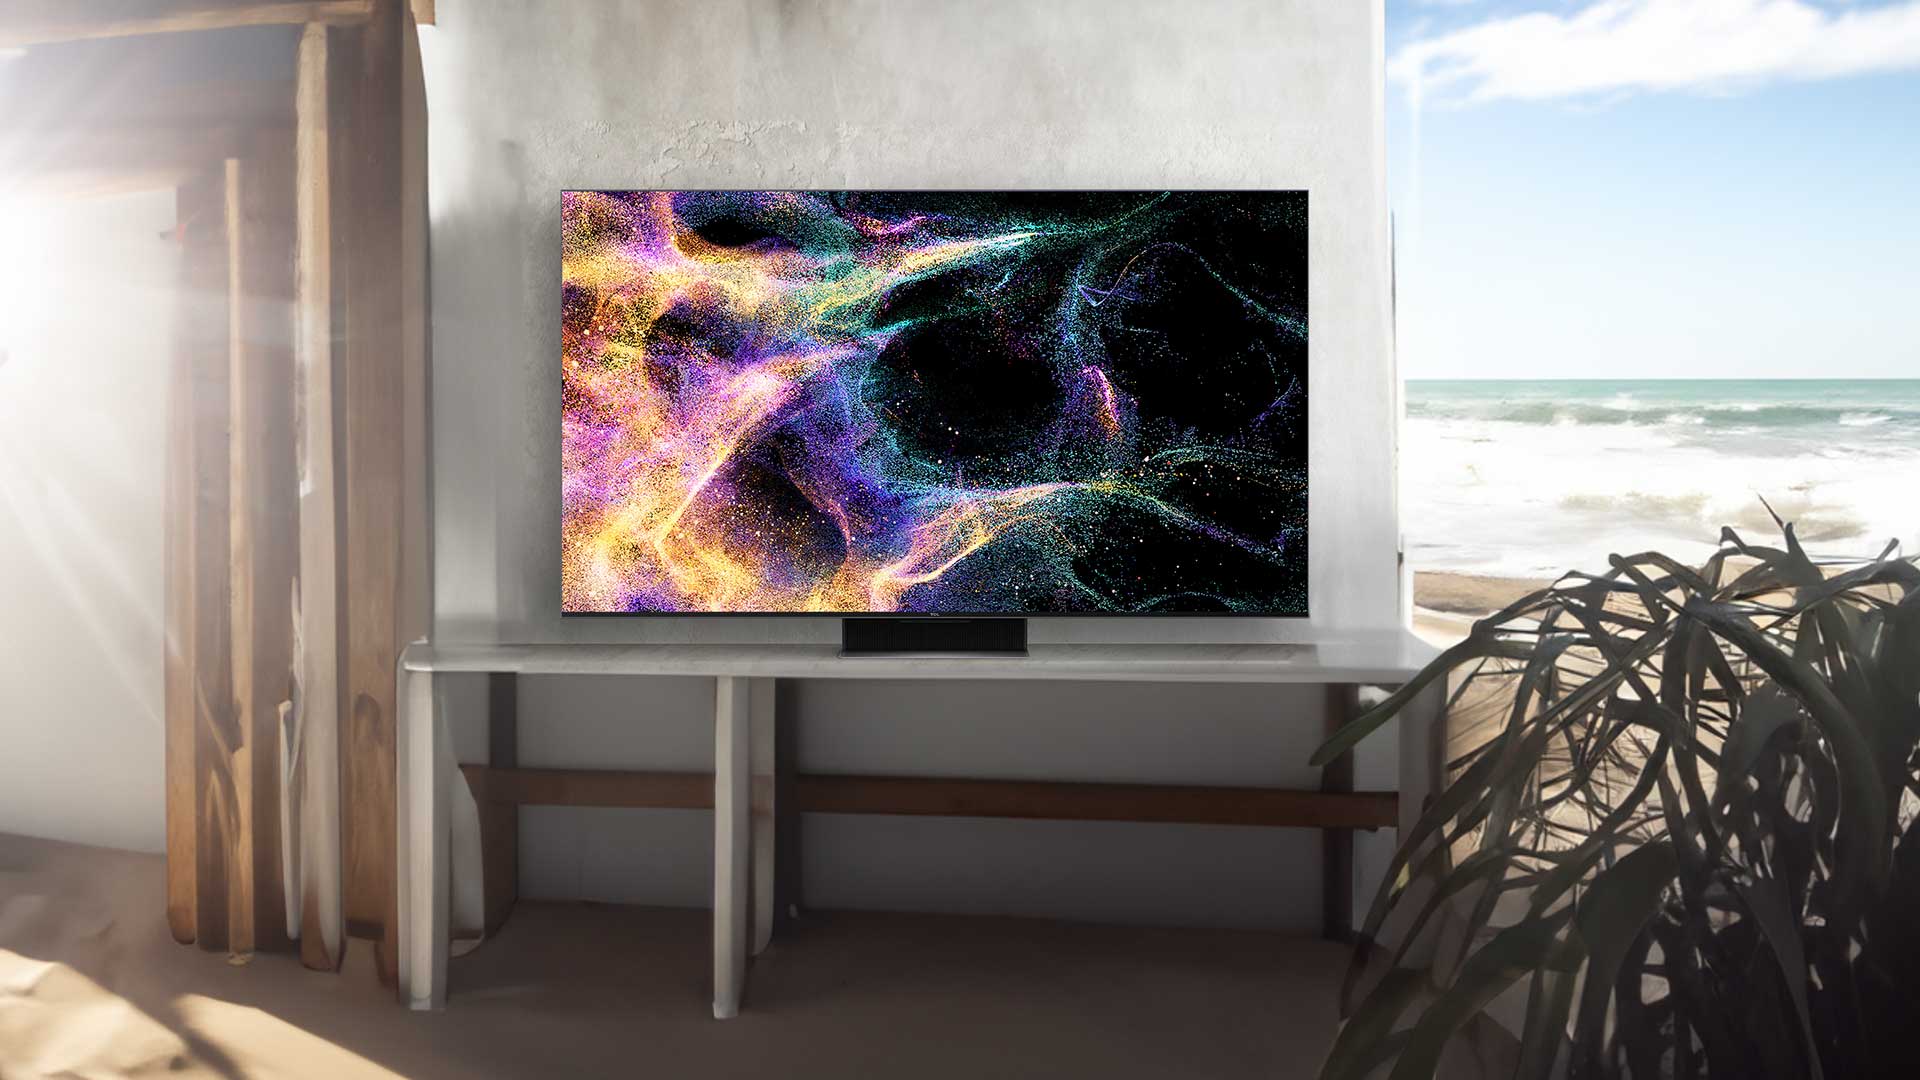 TCL C805 4K Ultra HD TV: Mini LED, 1,300 nits, HDR10, Dolby Vision/Atmos,  144 Hz and Google TV